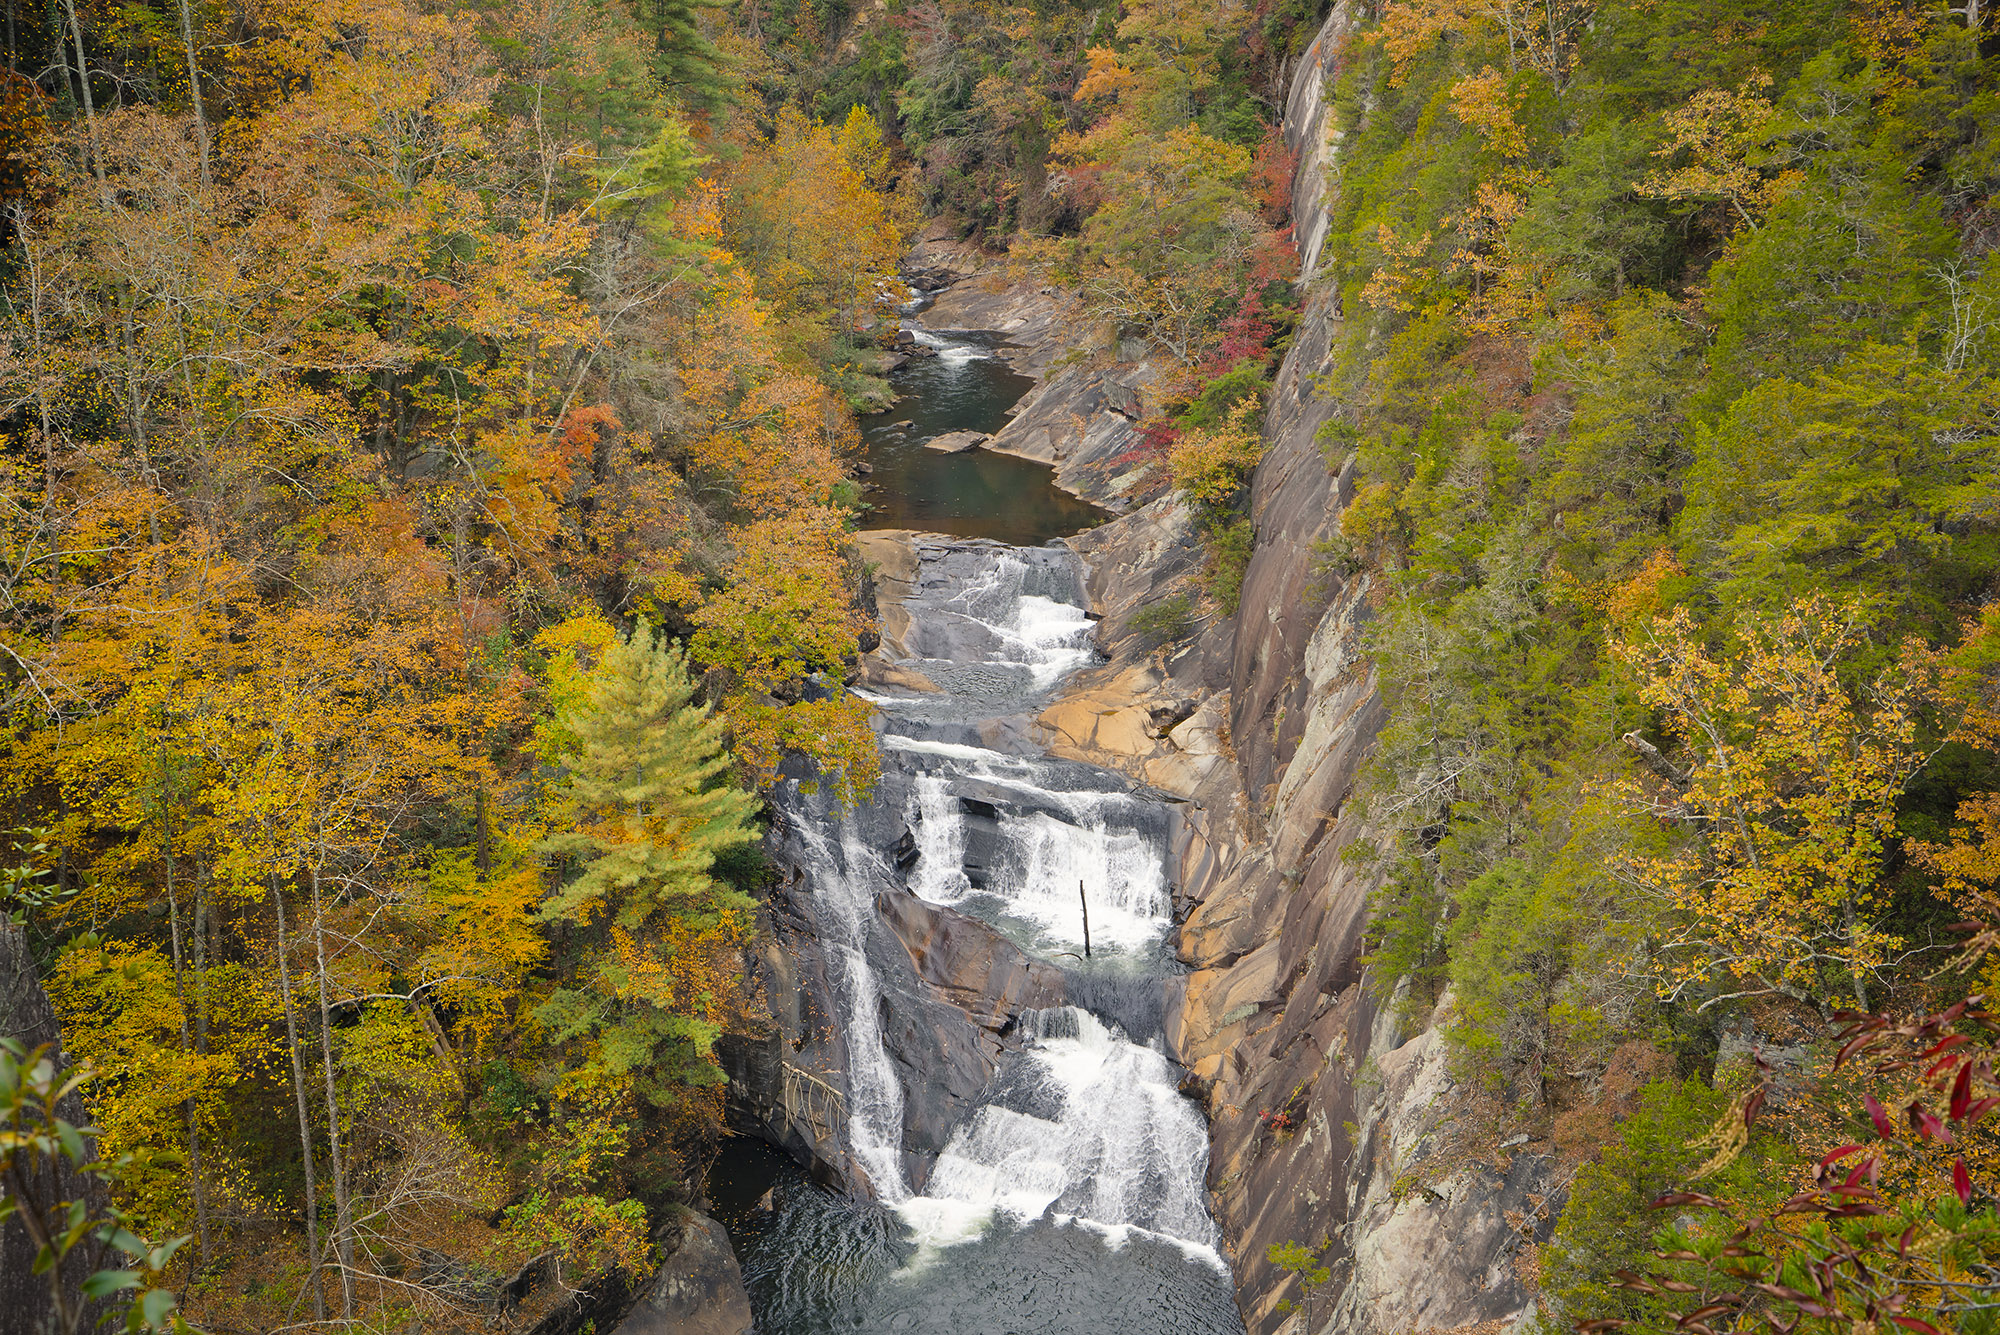 Tallulah Falls, Ga Plan a visit with dining, local attractions, hiking and beautiful scenery